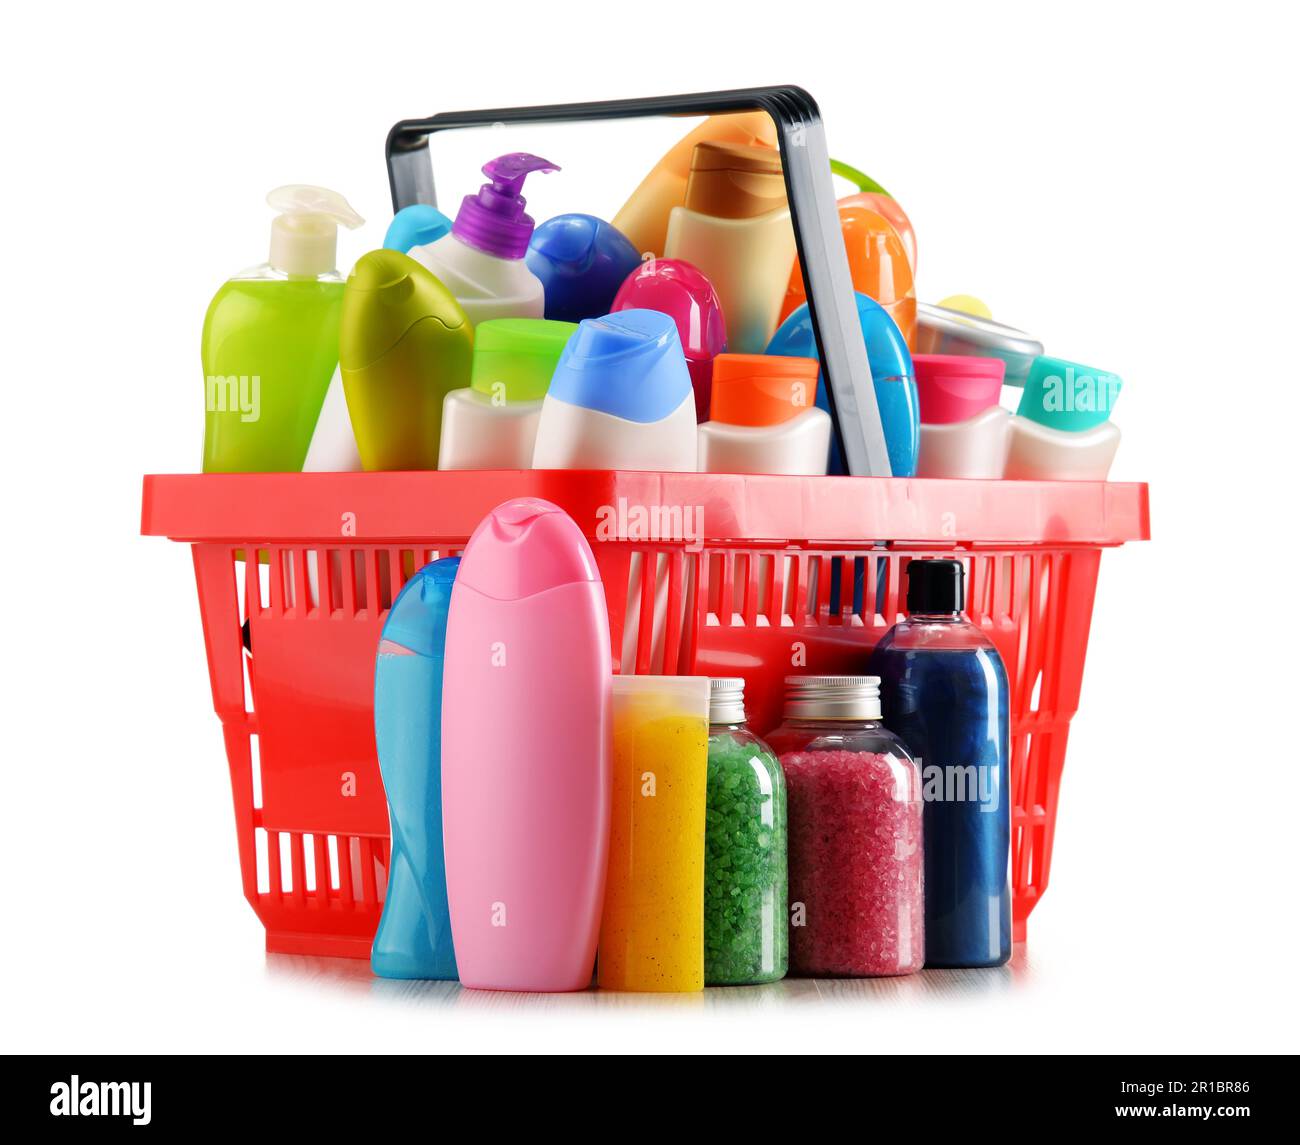 https://c8.alamy.com/comp/2R1BR86/shopping-basket-with-body-care-and-beauty-products-isolated-on-white-2R1BR86.jpg